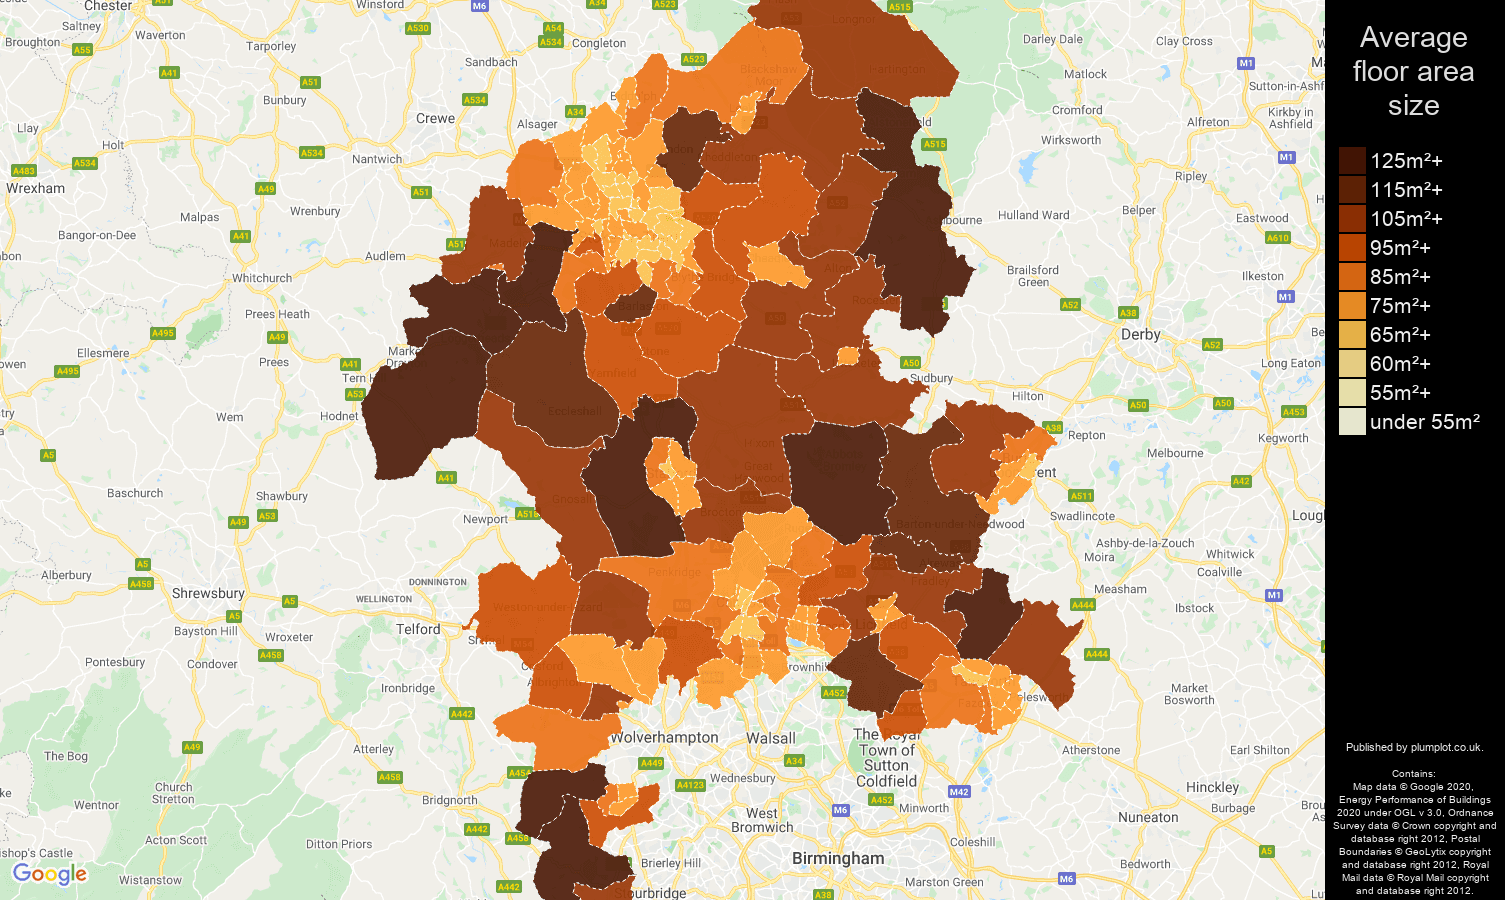 Staffordshire map of average floor area size of properties